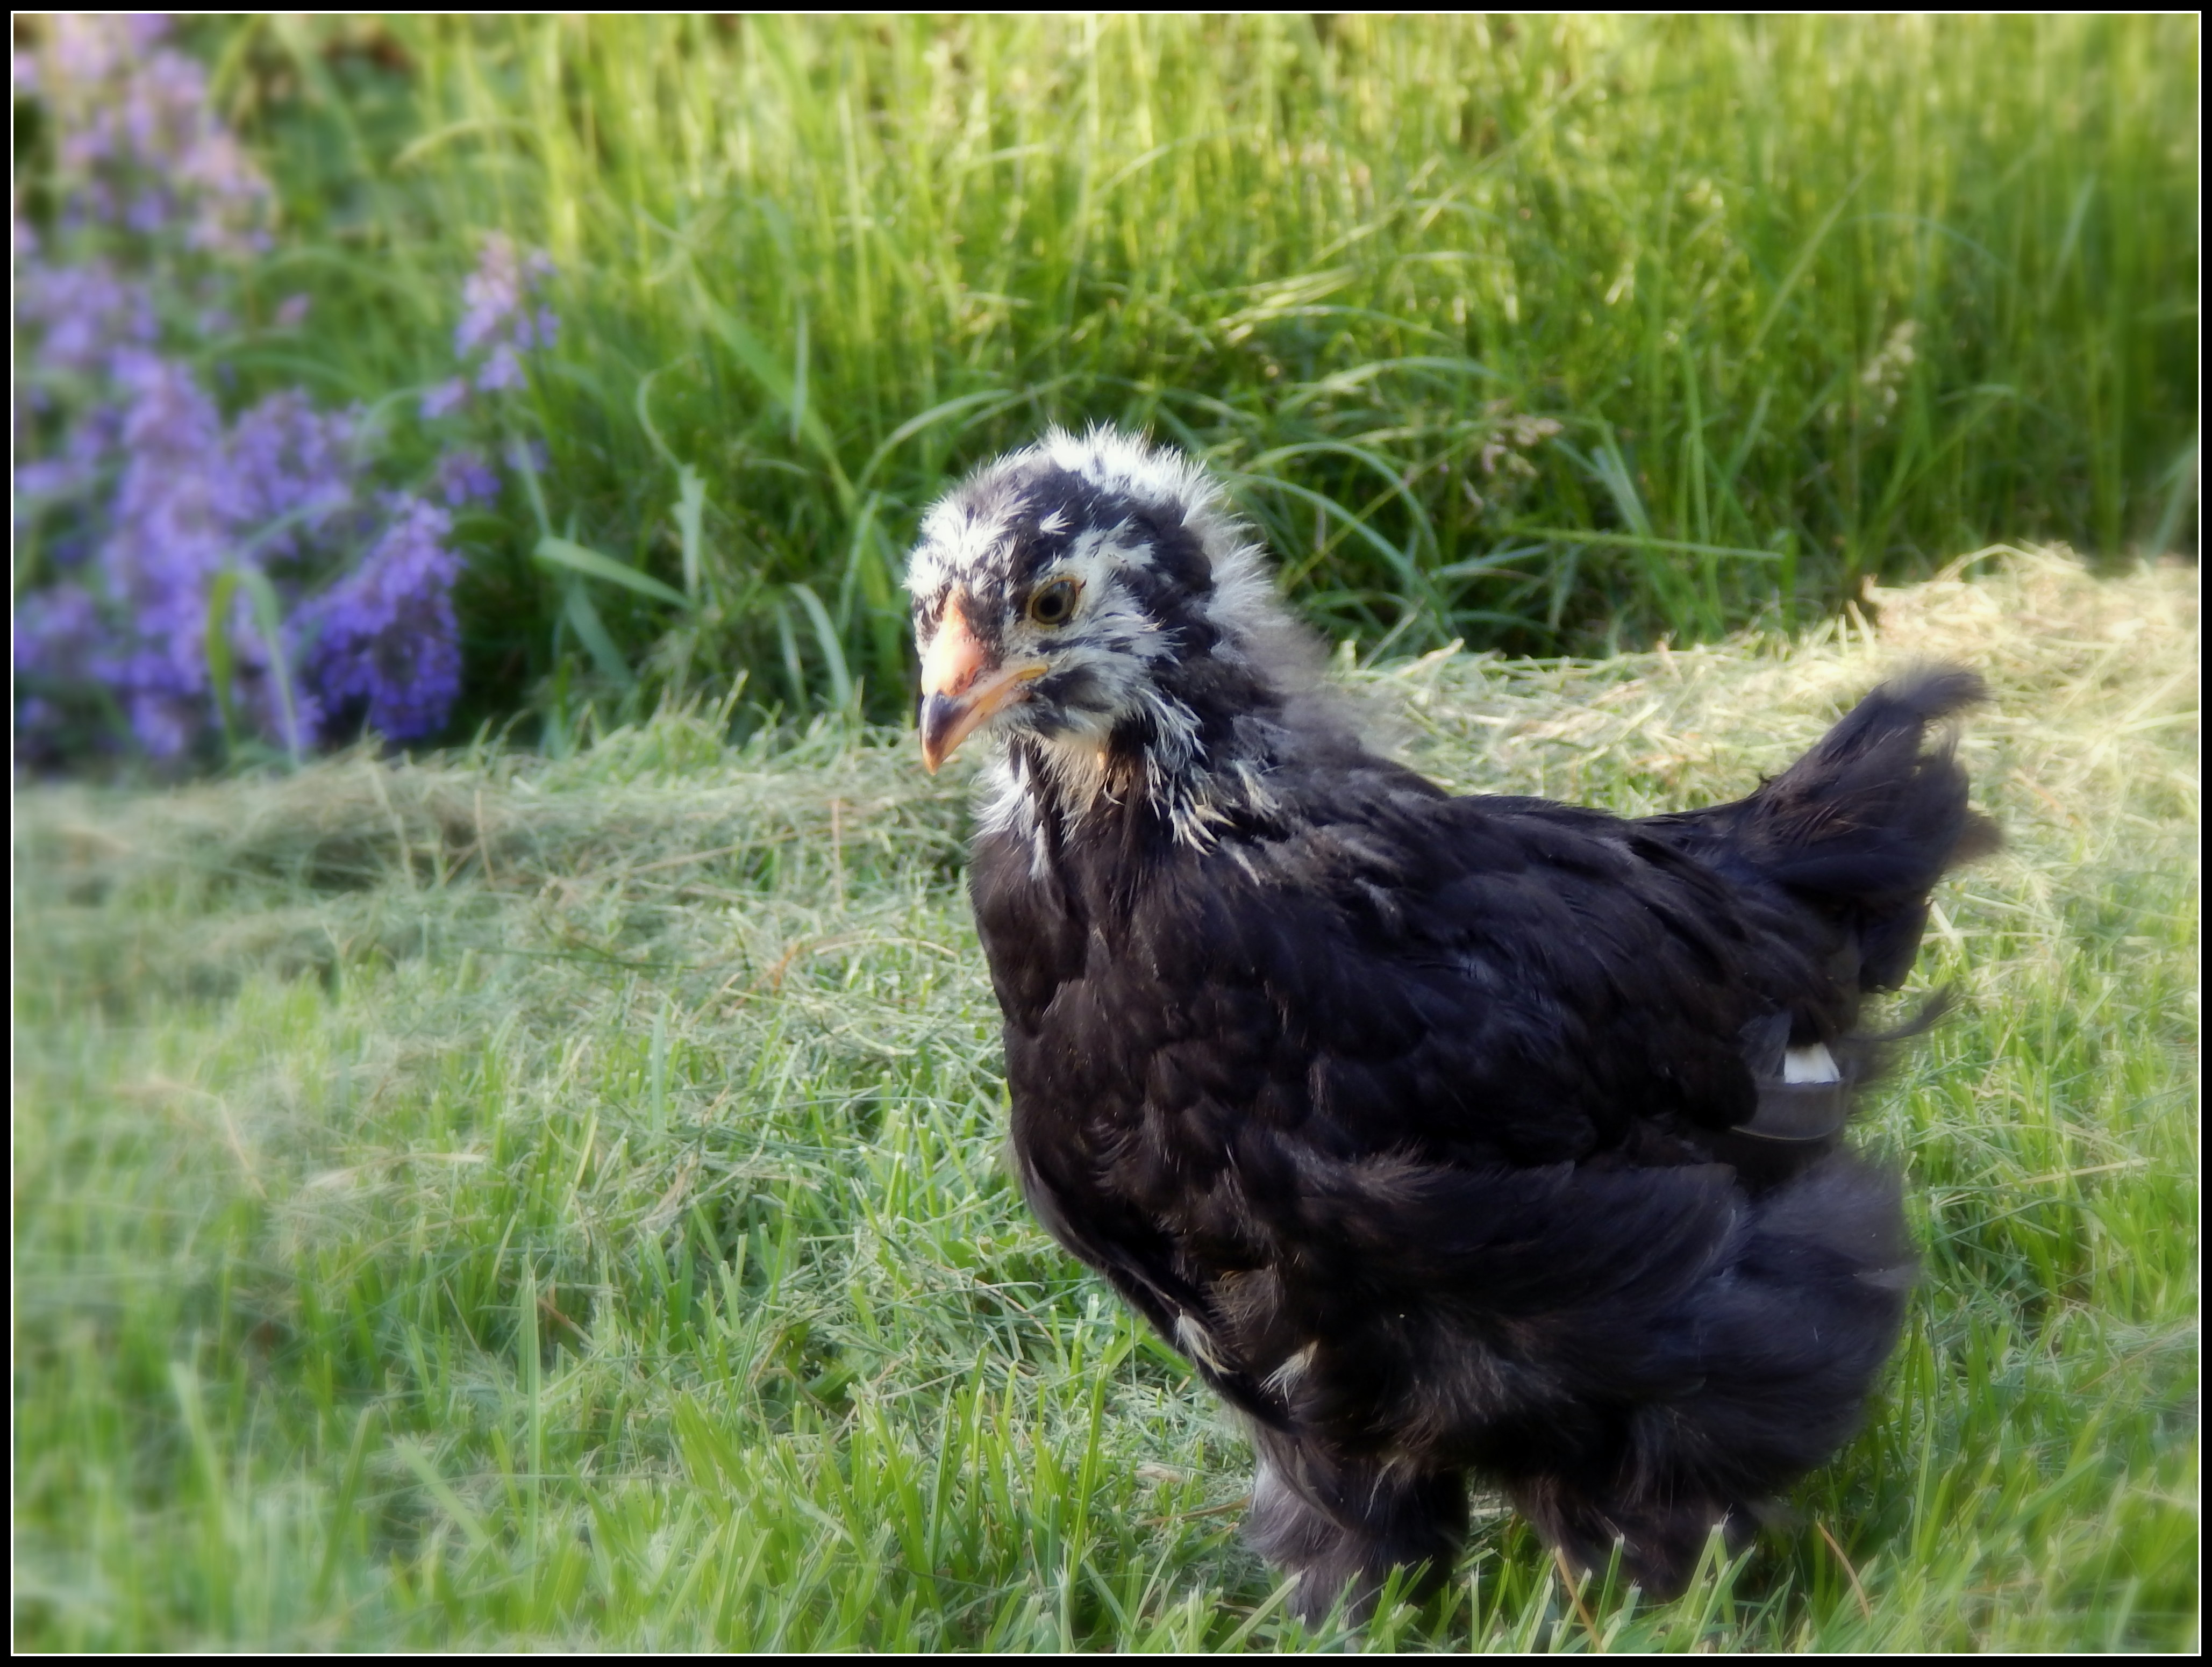 "Poppy", 5 week old Black Ameraucana (she was supposed to be blue)